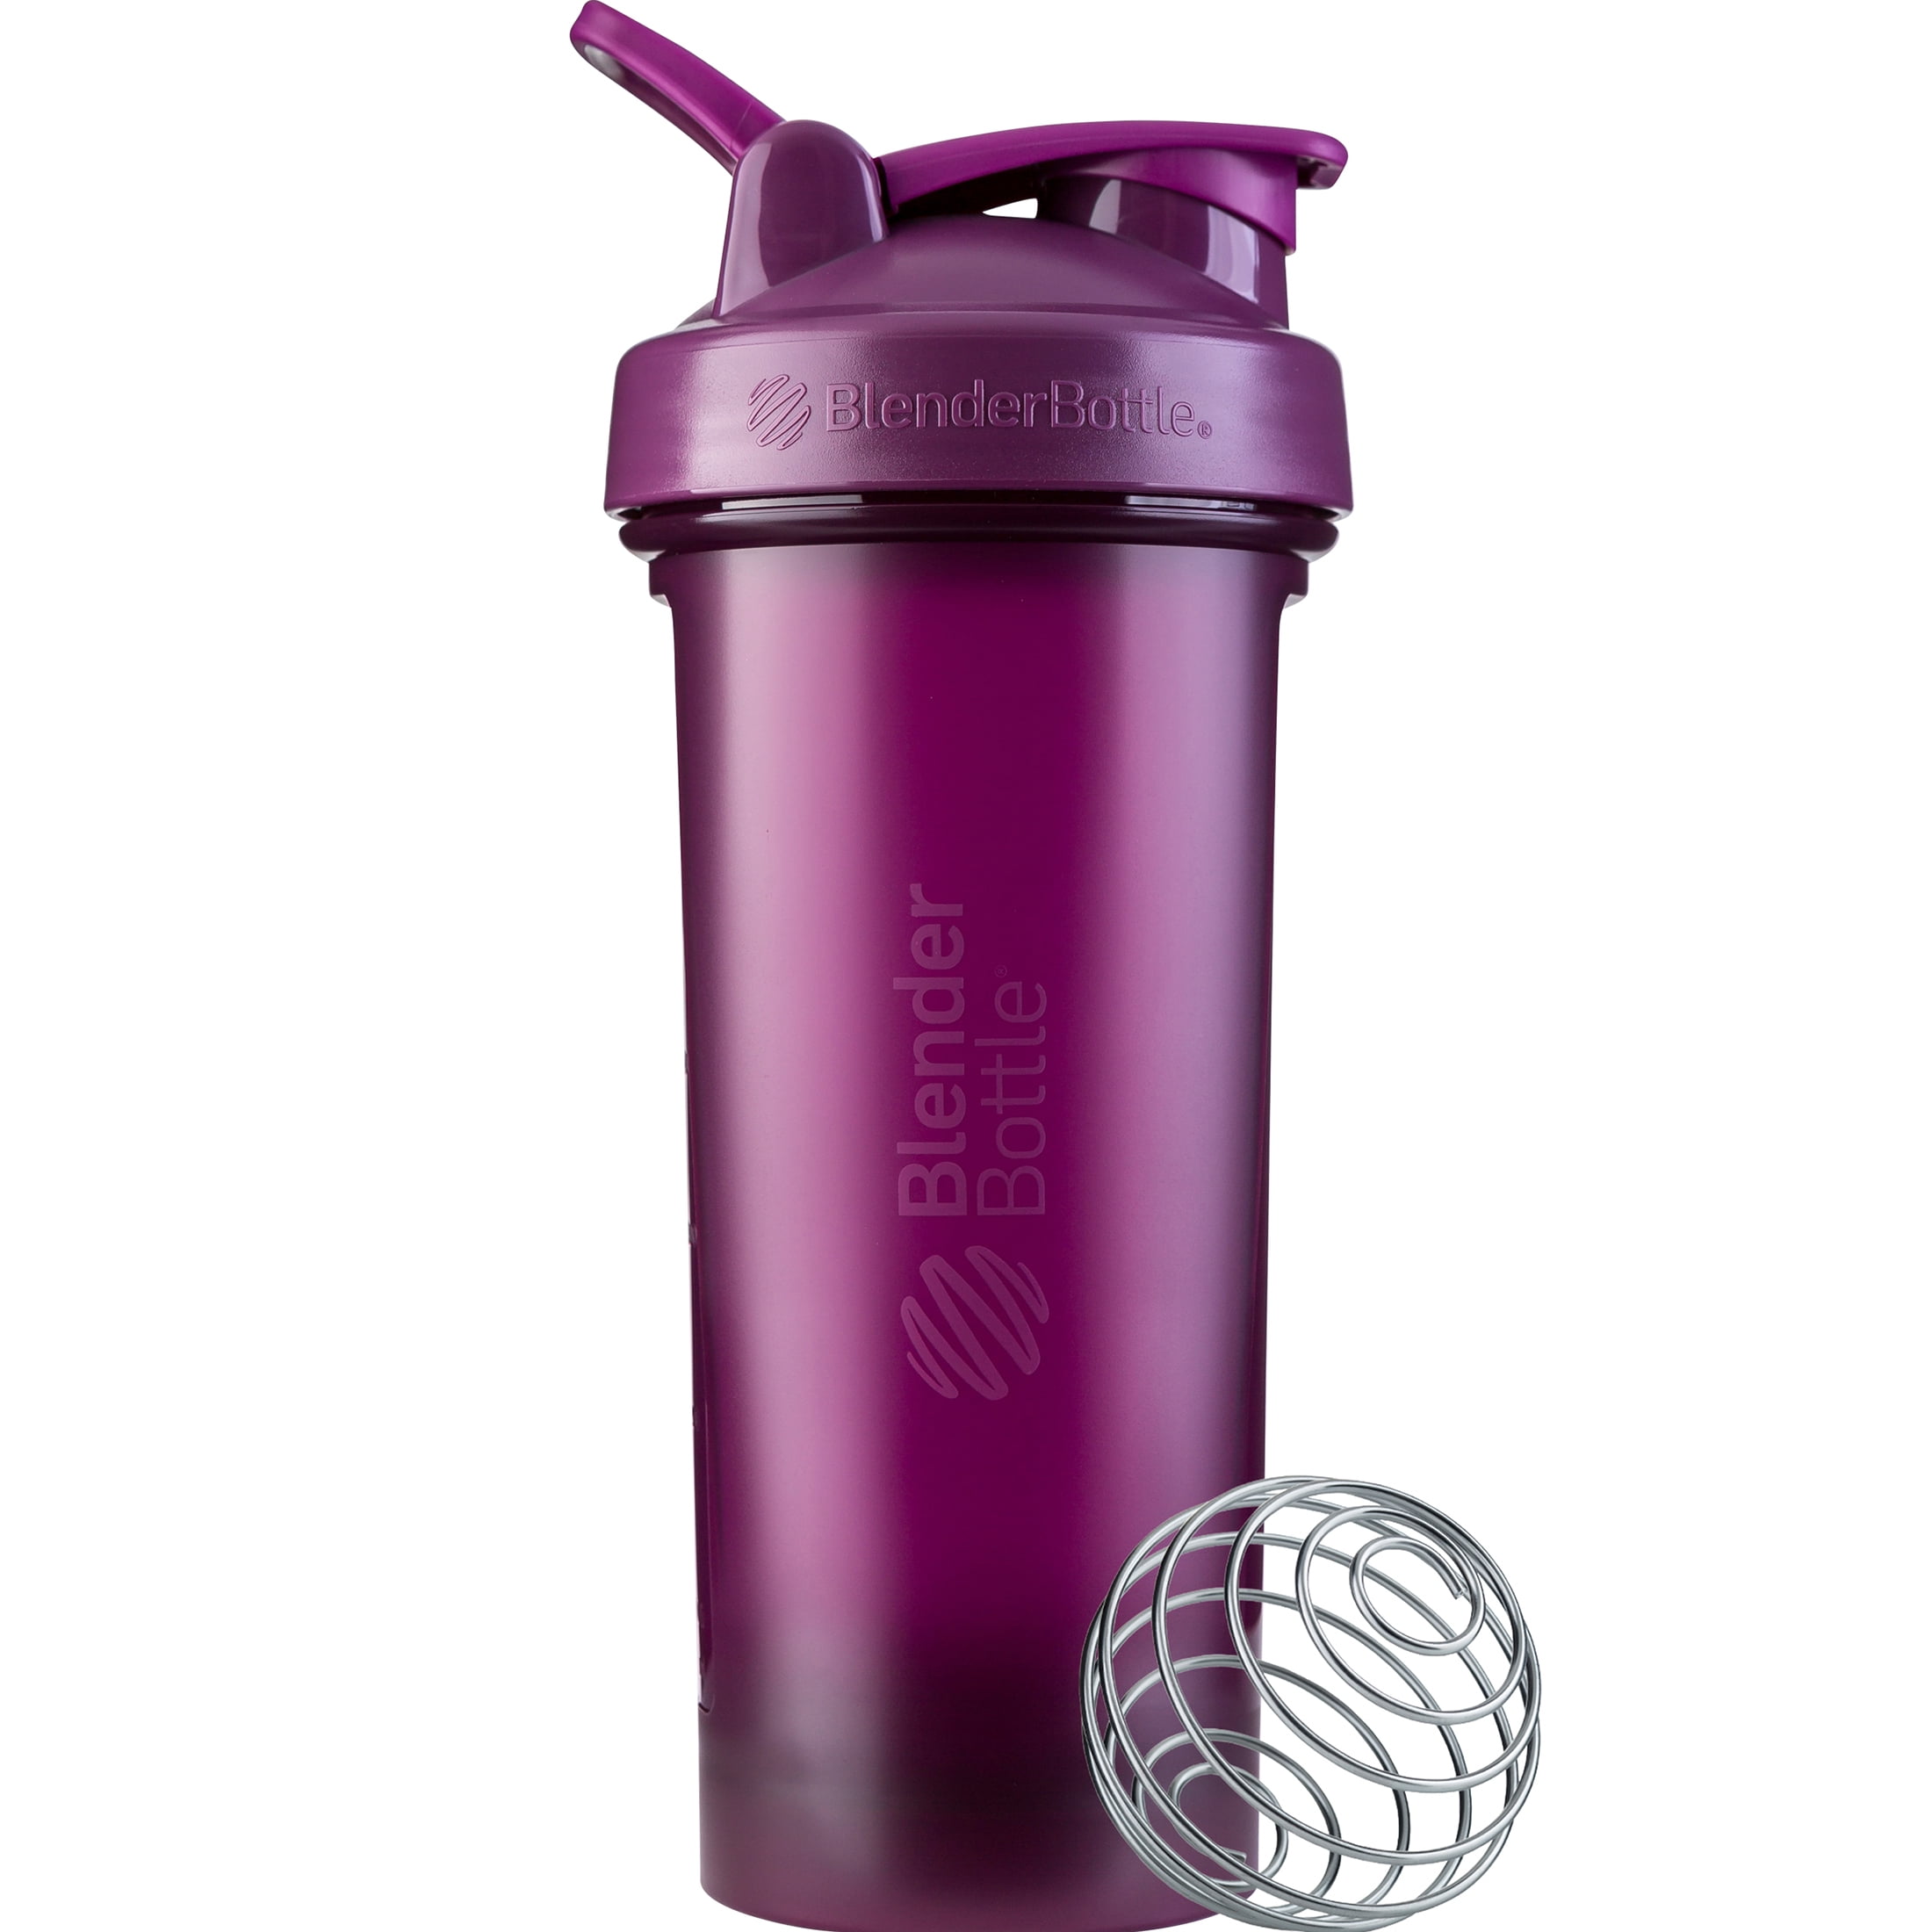 Ghost Blender Bottle 28oz Shaker Mix Cup with Loop Top - Purple Teal Great  Cond.